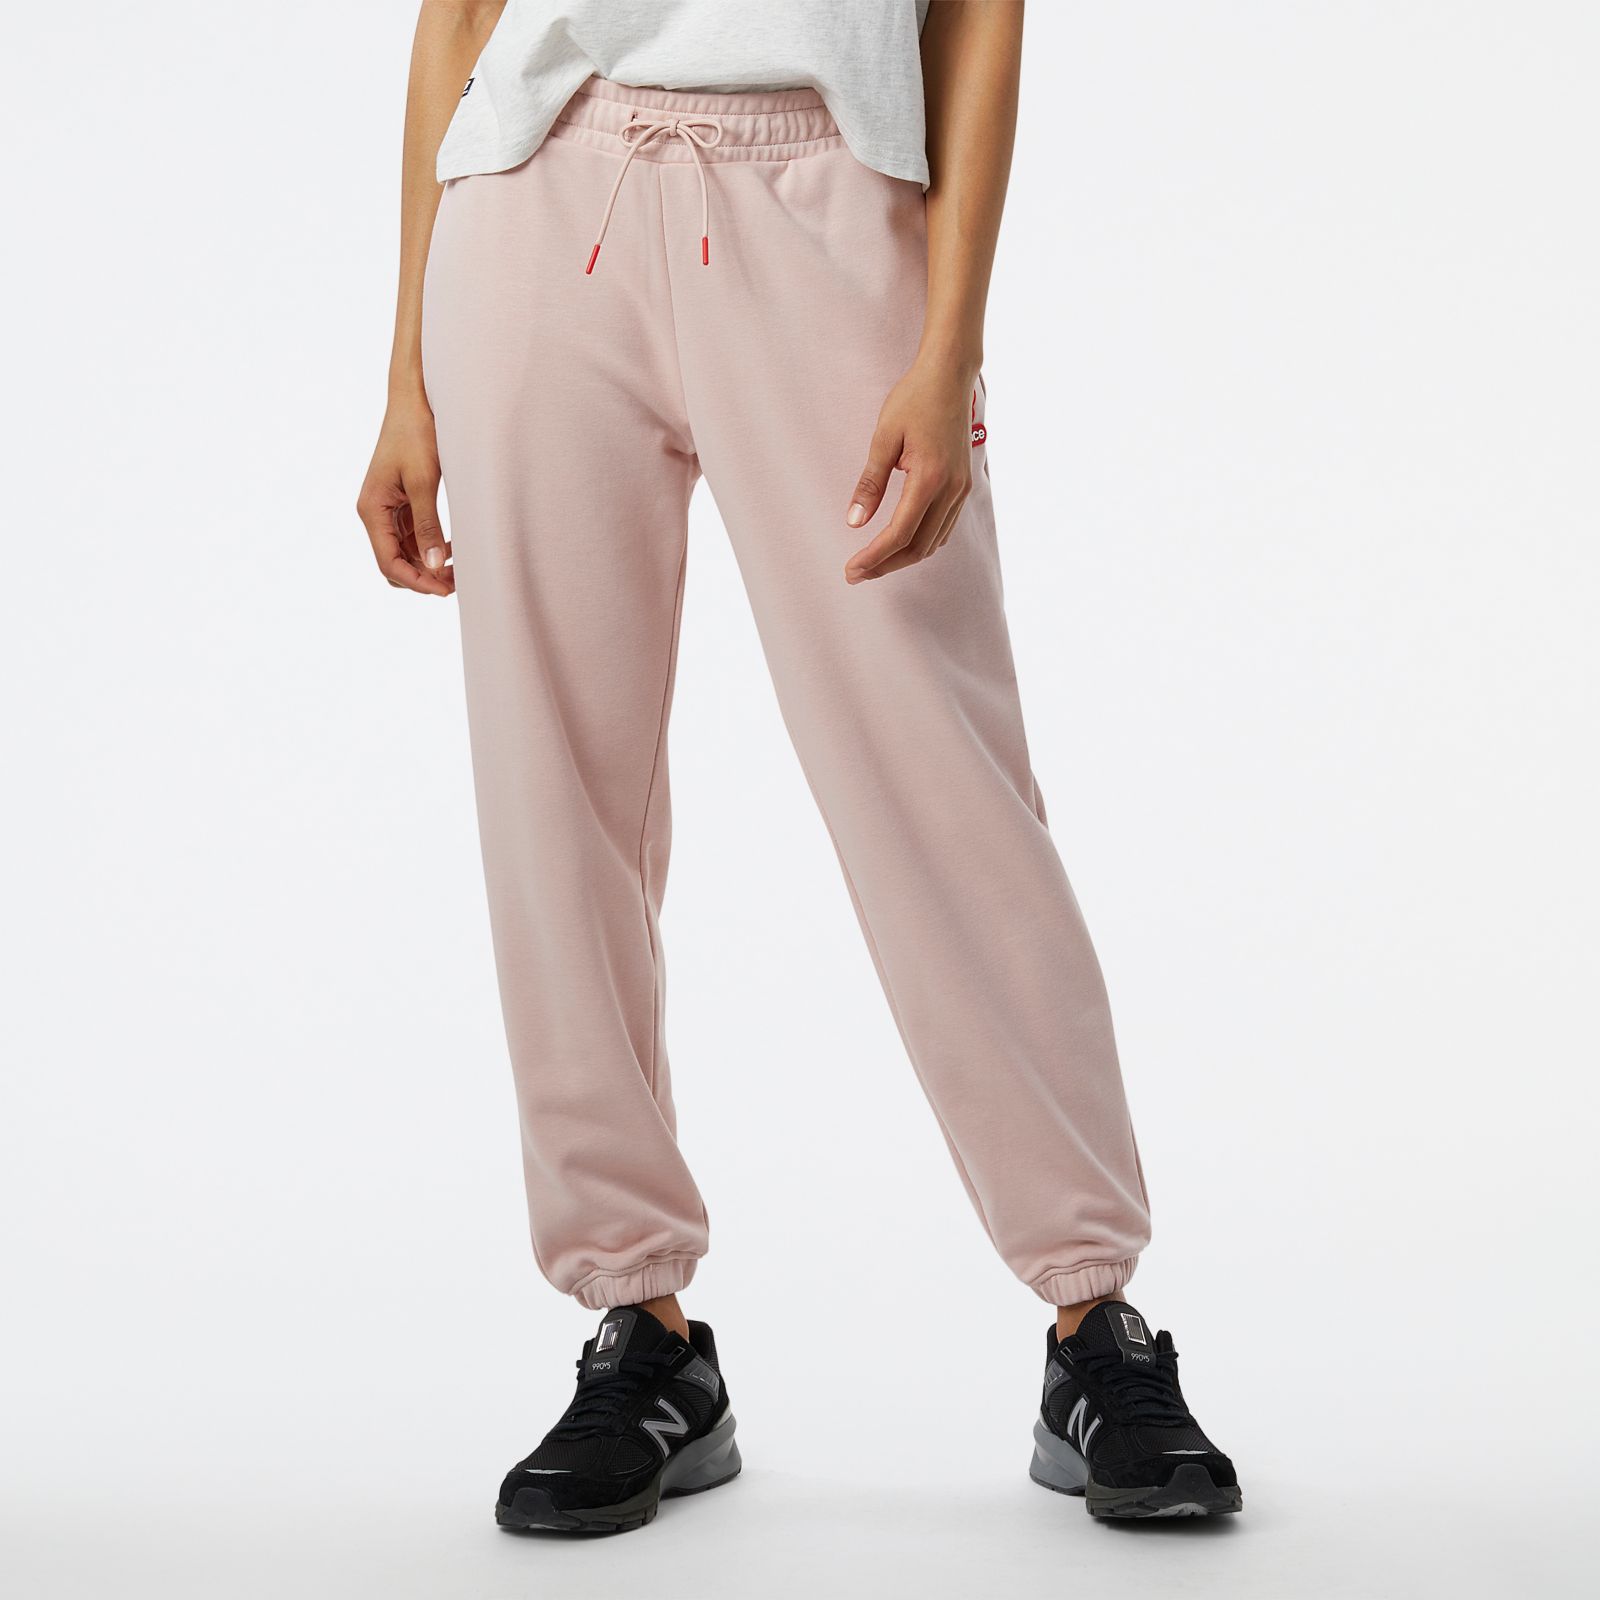 Women's NB Essentials Candy Pack Pant Apparel - New Balance